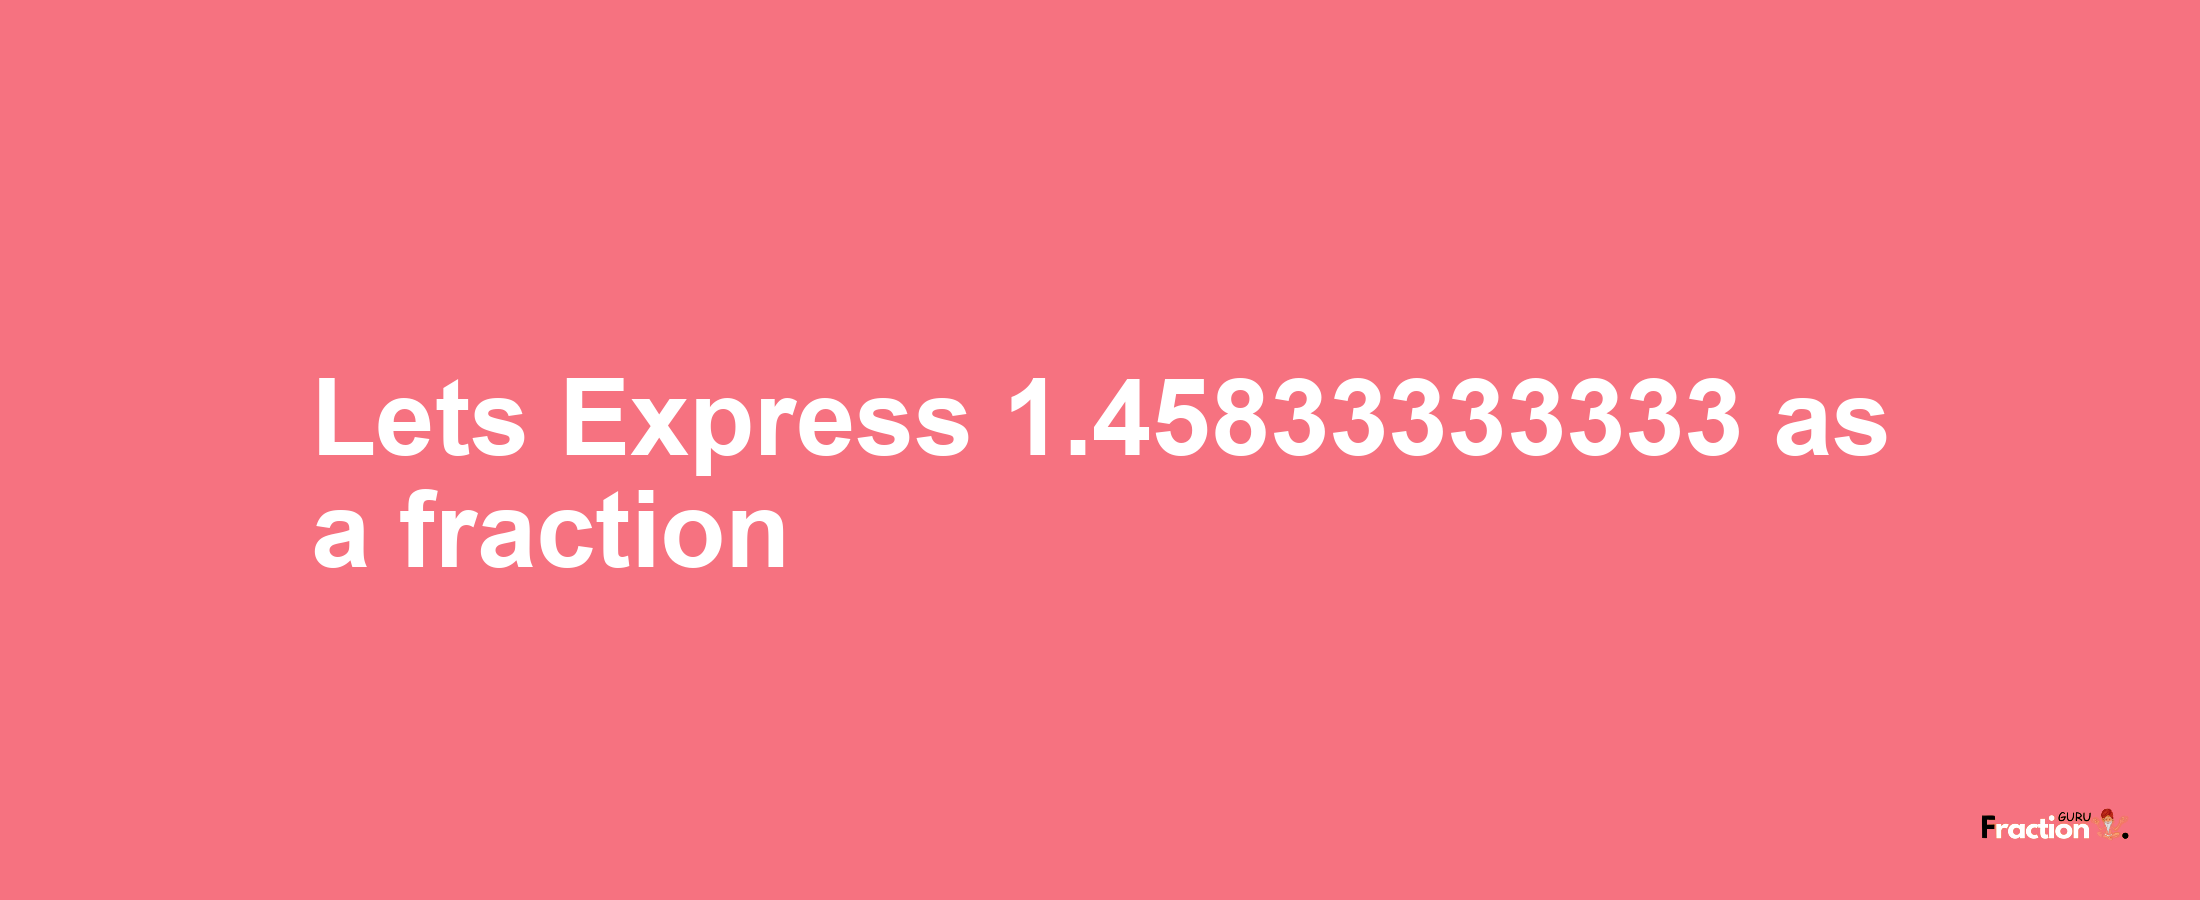 Lets Express 1.45833333333 as afraction